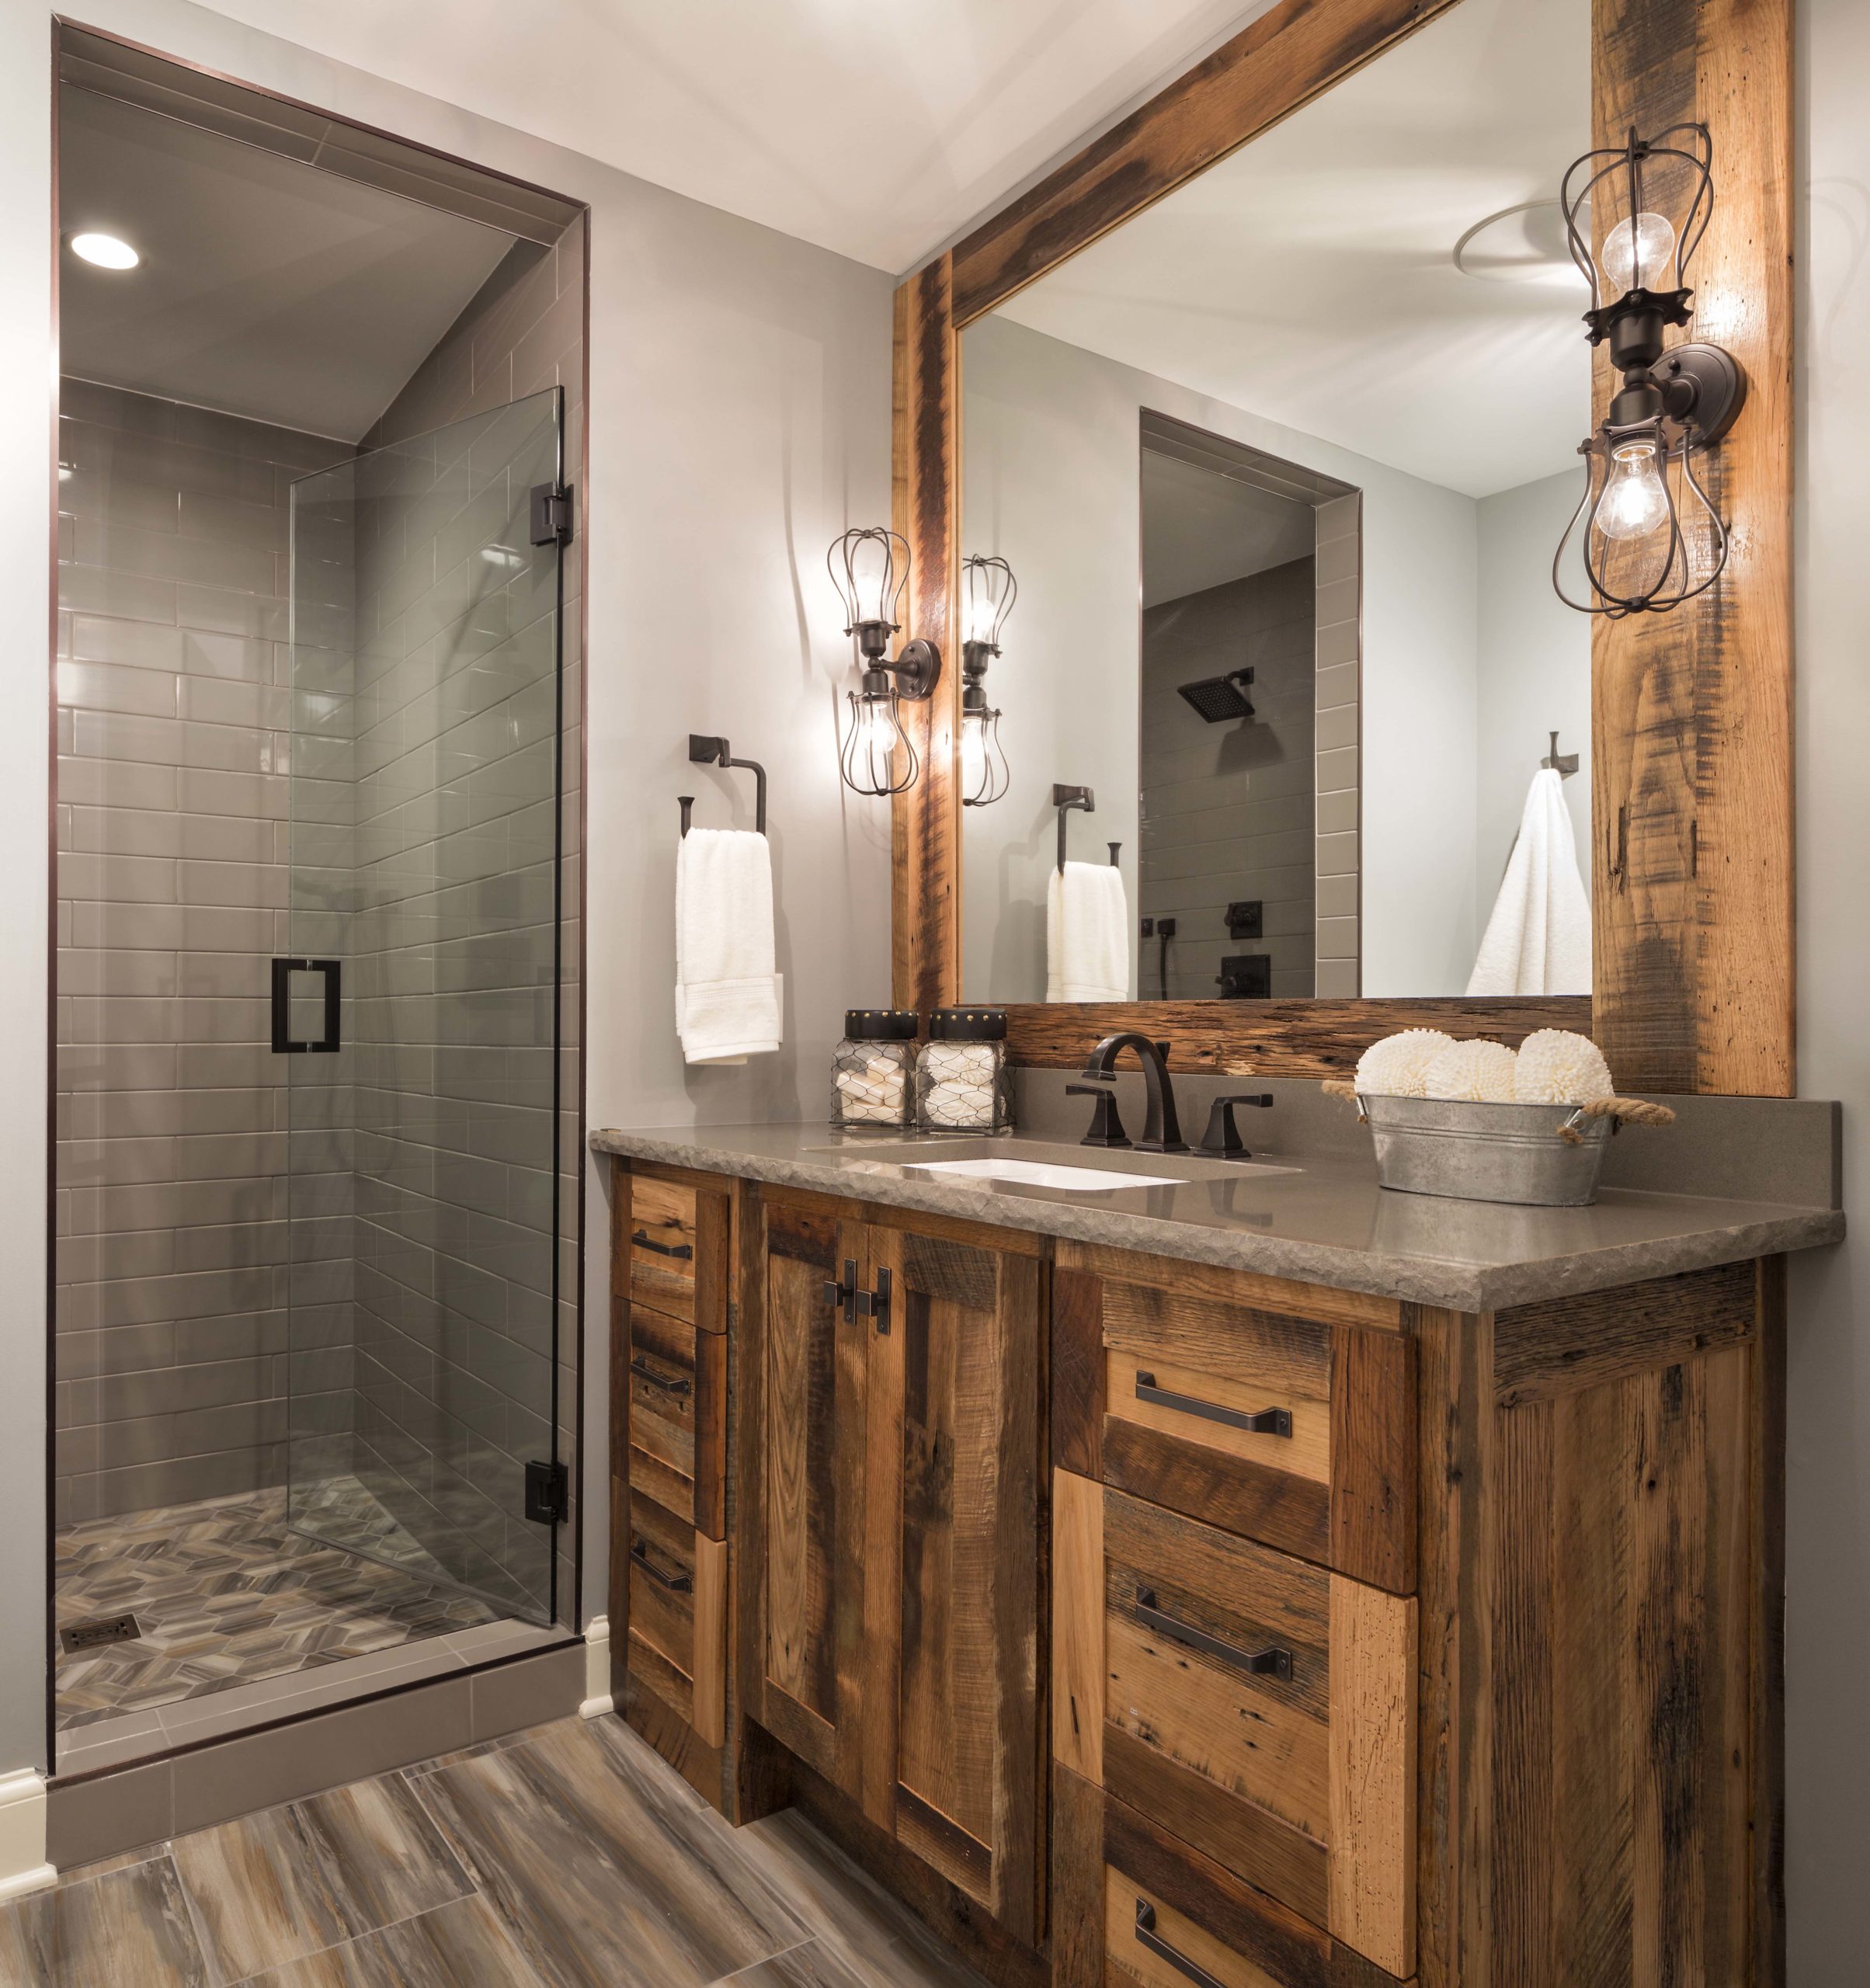 A bathroom with a wooden vanity and a glass shower.